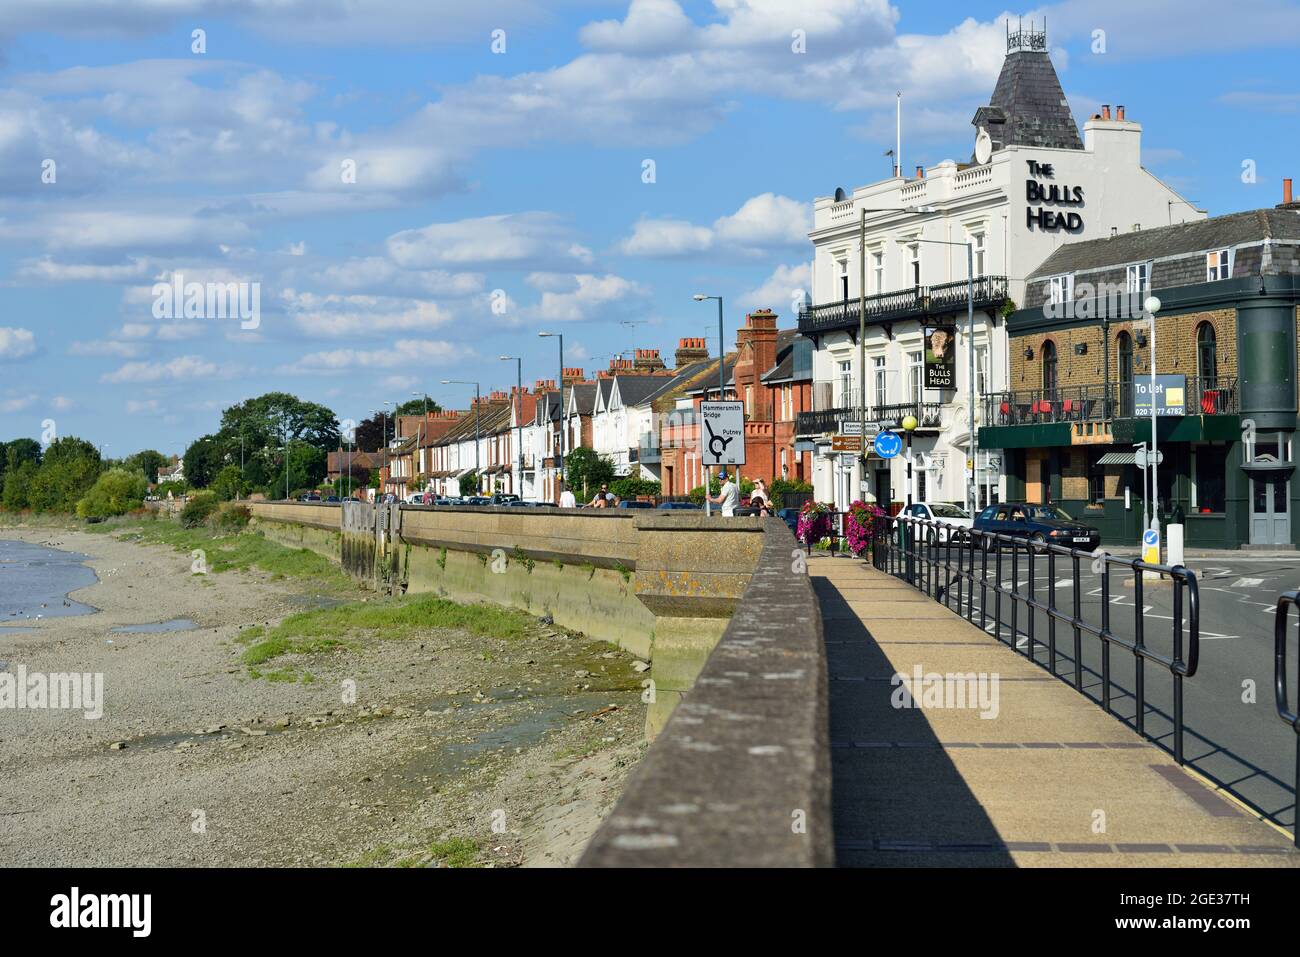 Barnes riverfront and The Bull's Head public house, Lonsdale Rd, Barnes, South West London, United Kingdom Stock Photo